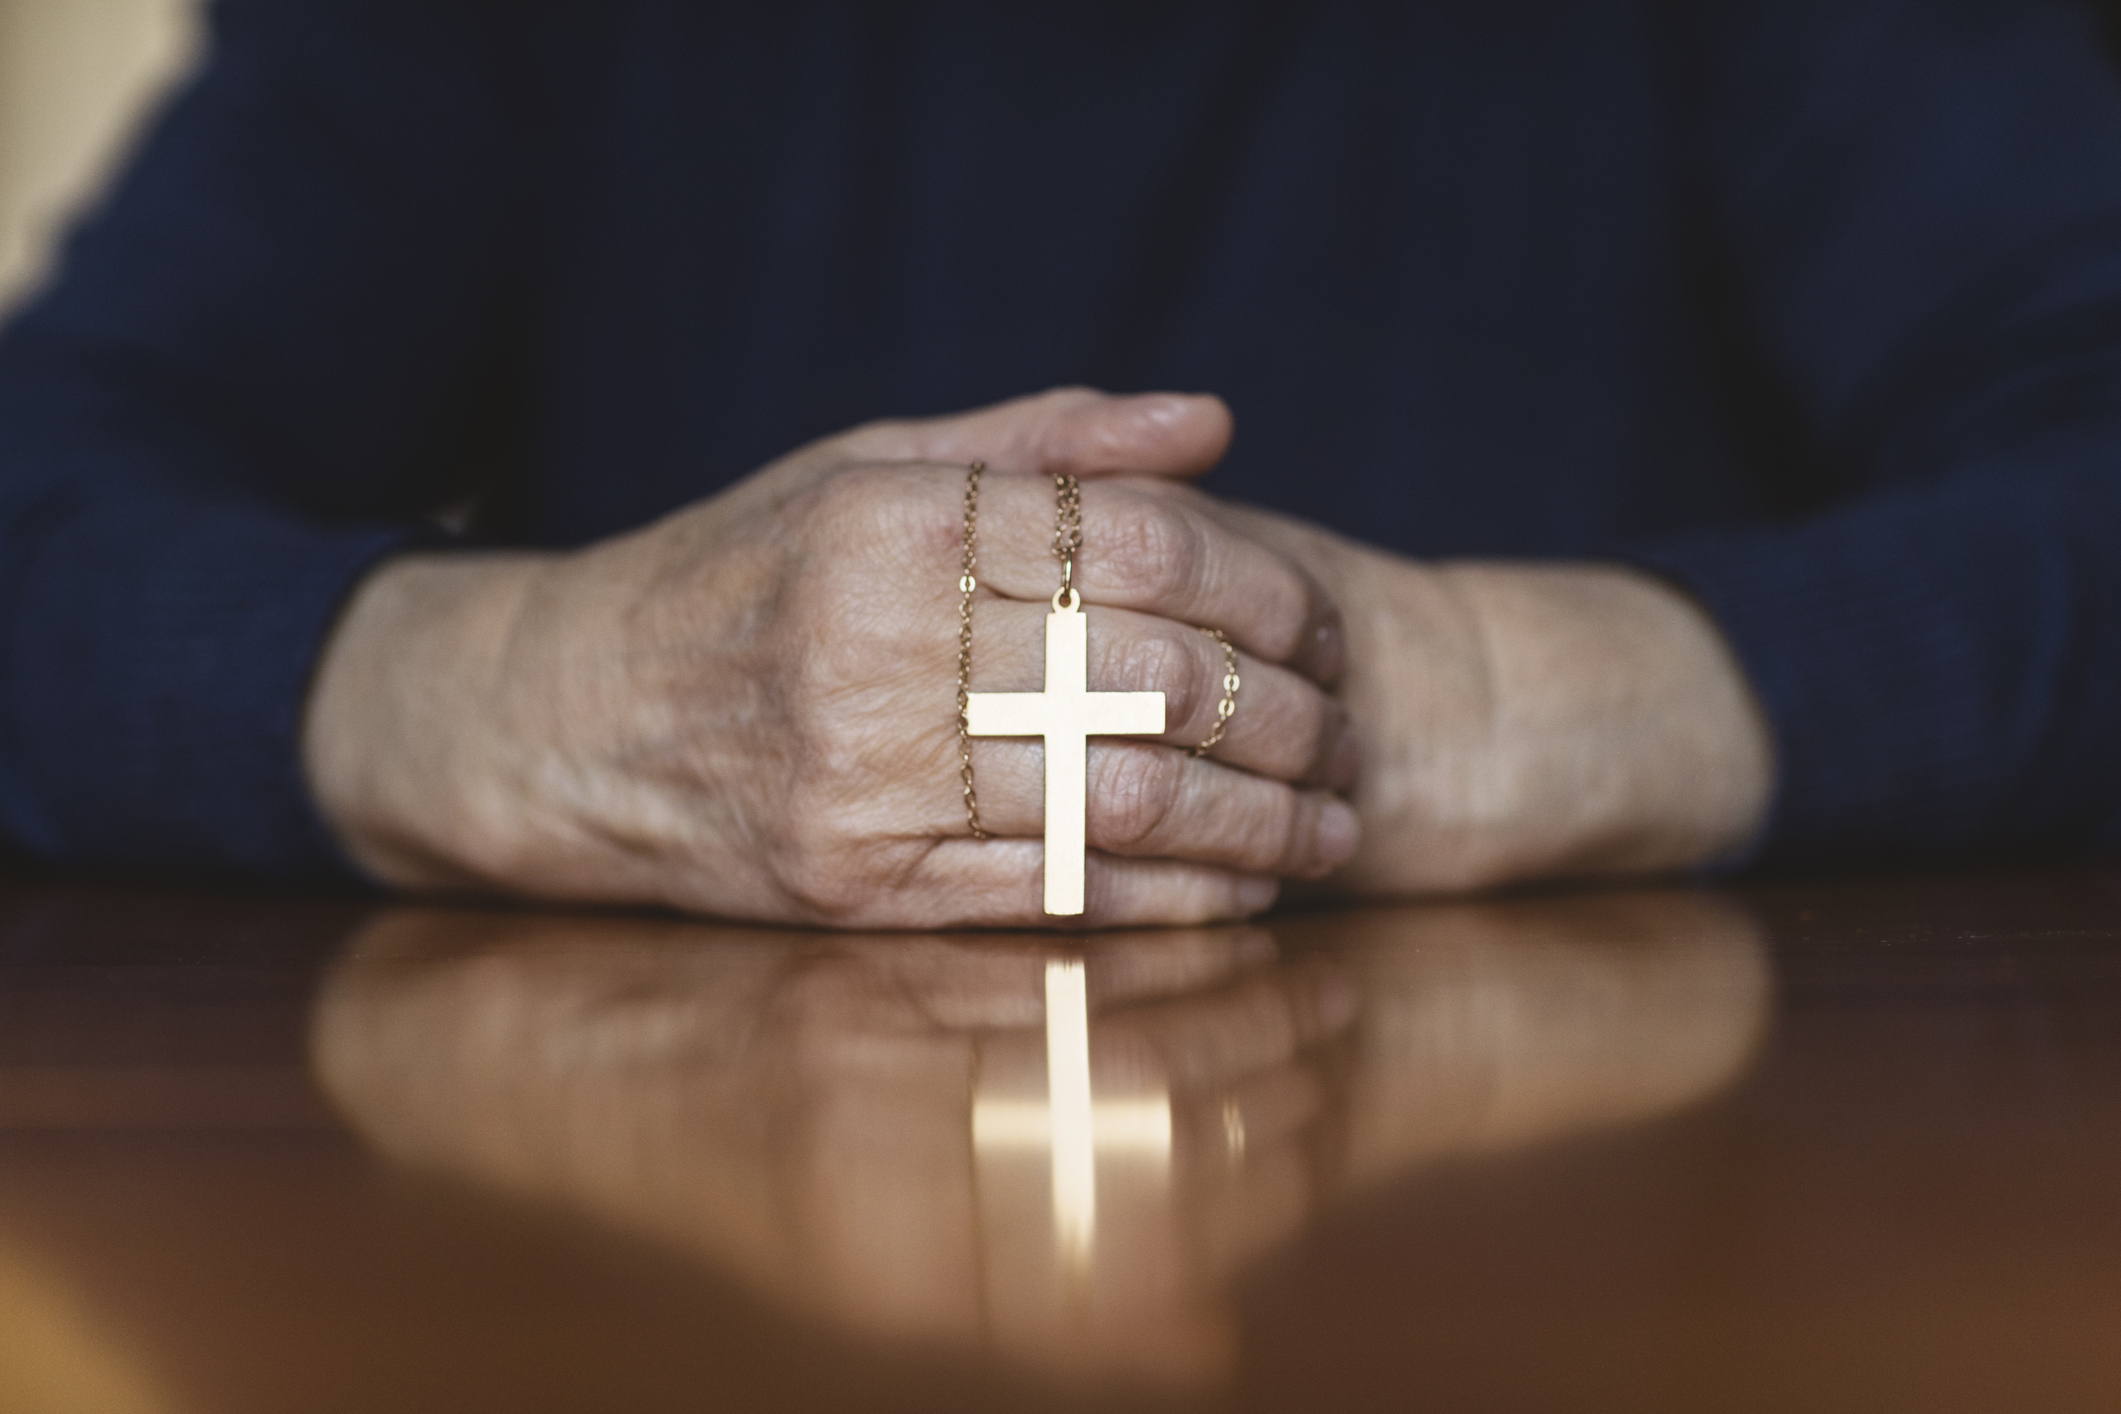 A person is holding a cross necklace